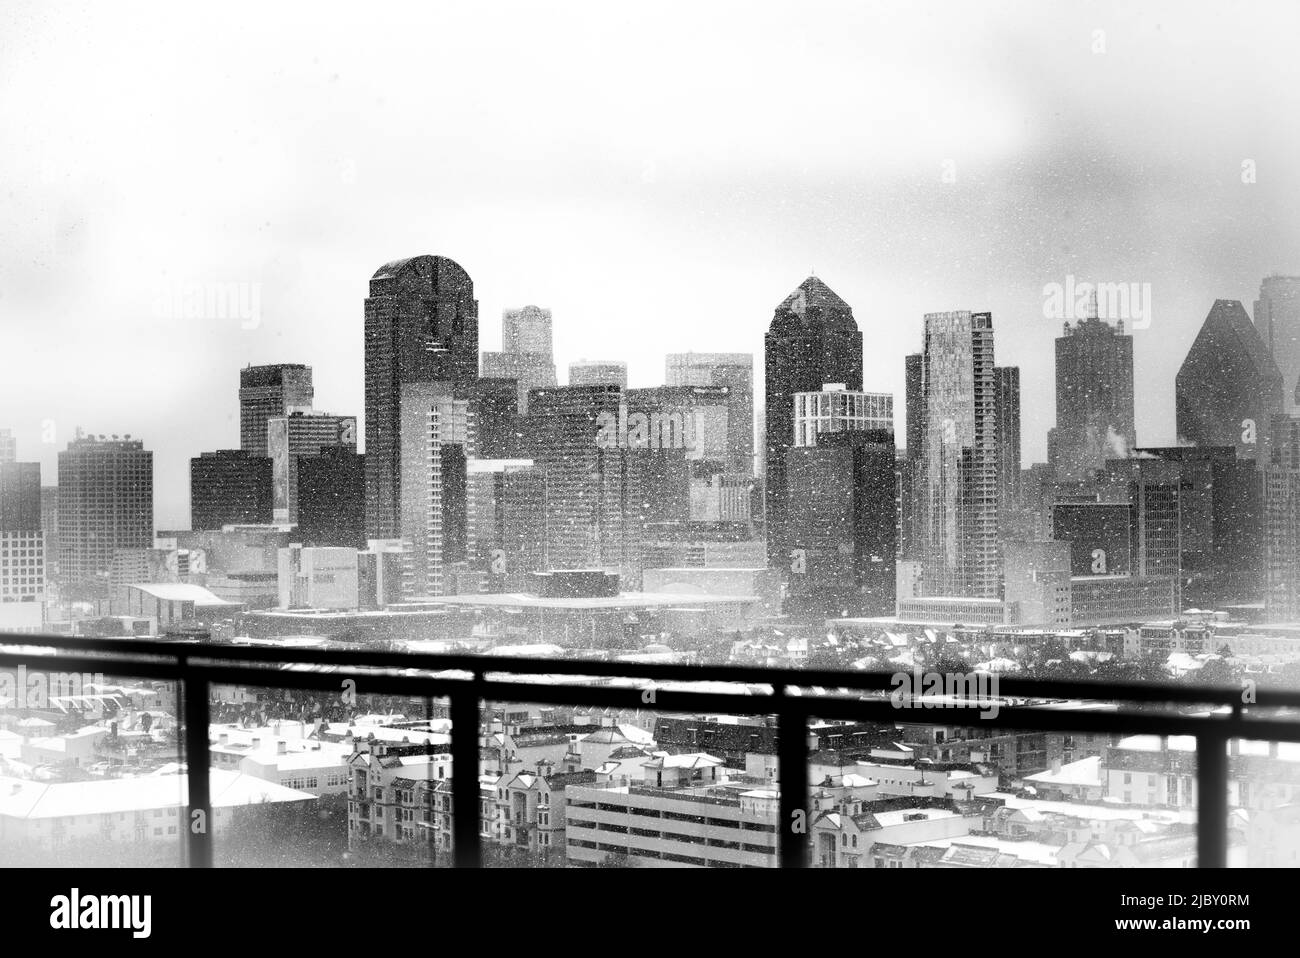 A Black and White Image of The Dallas Skyline During a Snow Storm Stock Photo